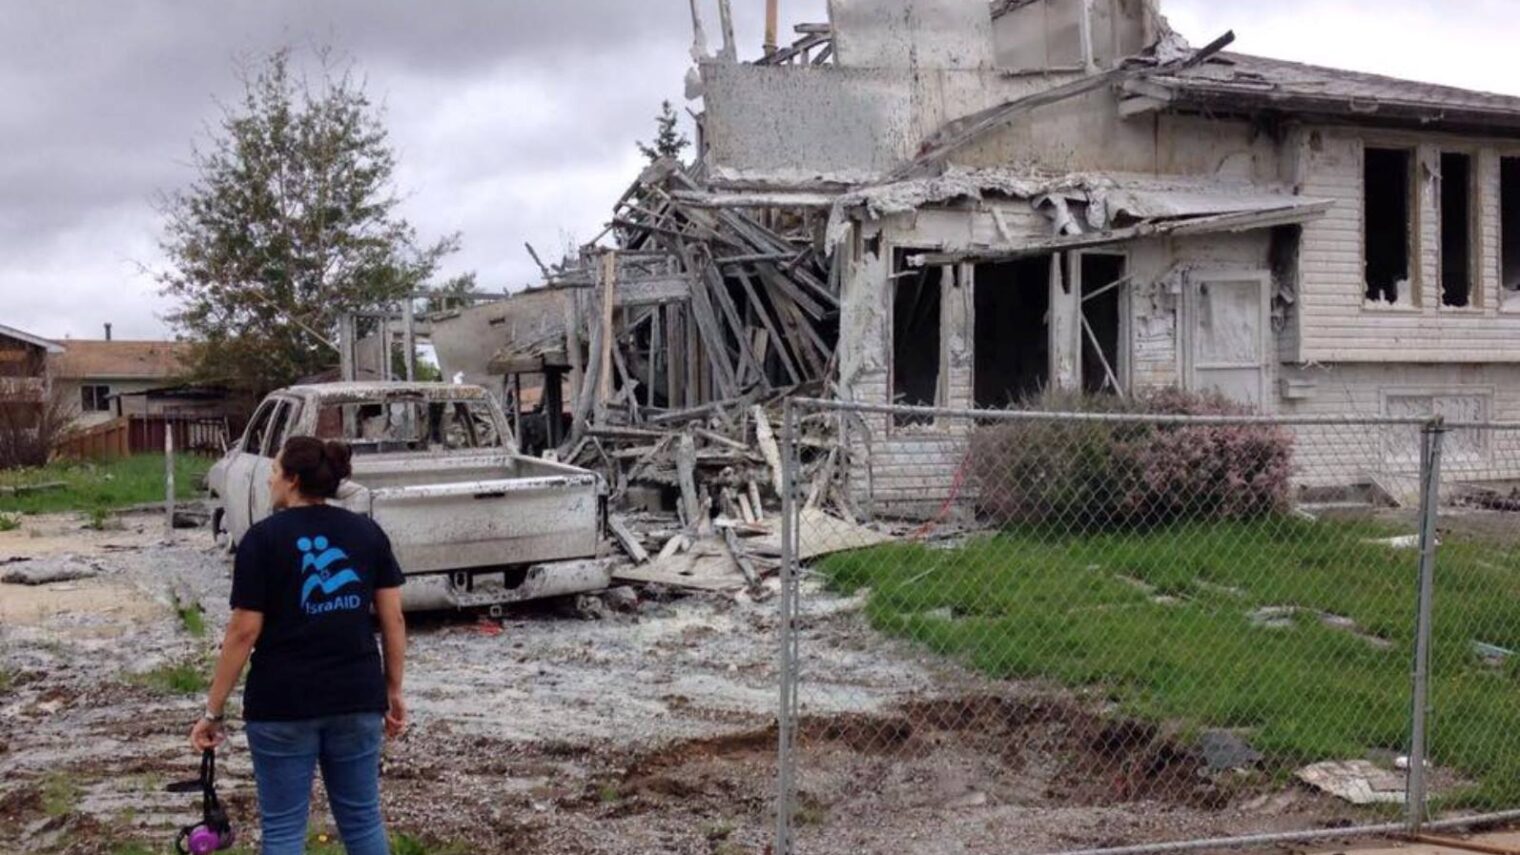 An IsraAID volunteer at the site of a burned home in Fort McMurray, Canada. Photo via Facebook